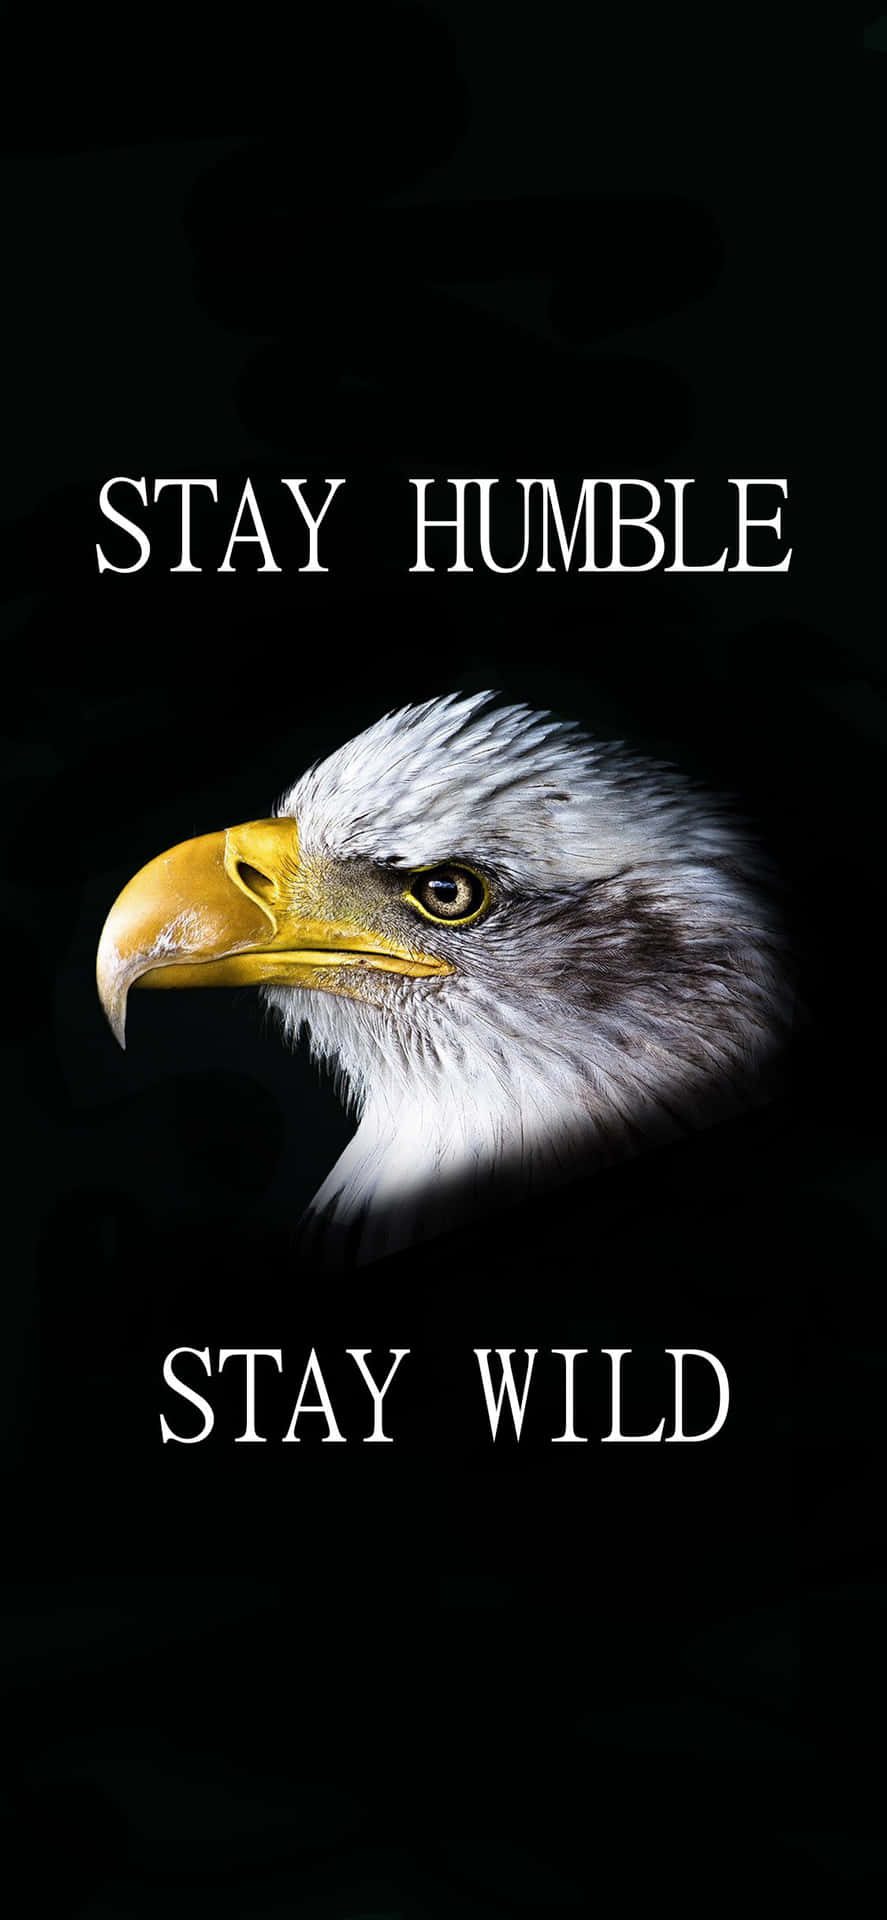 Stay Humble And Wild Wallpaper